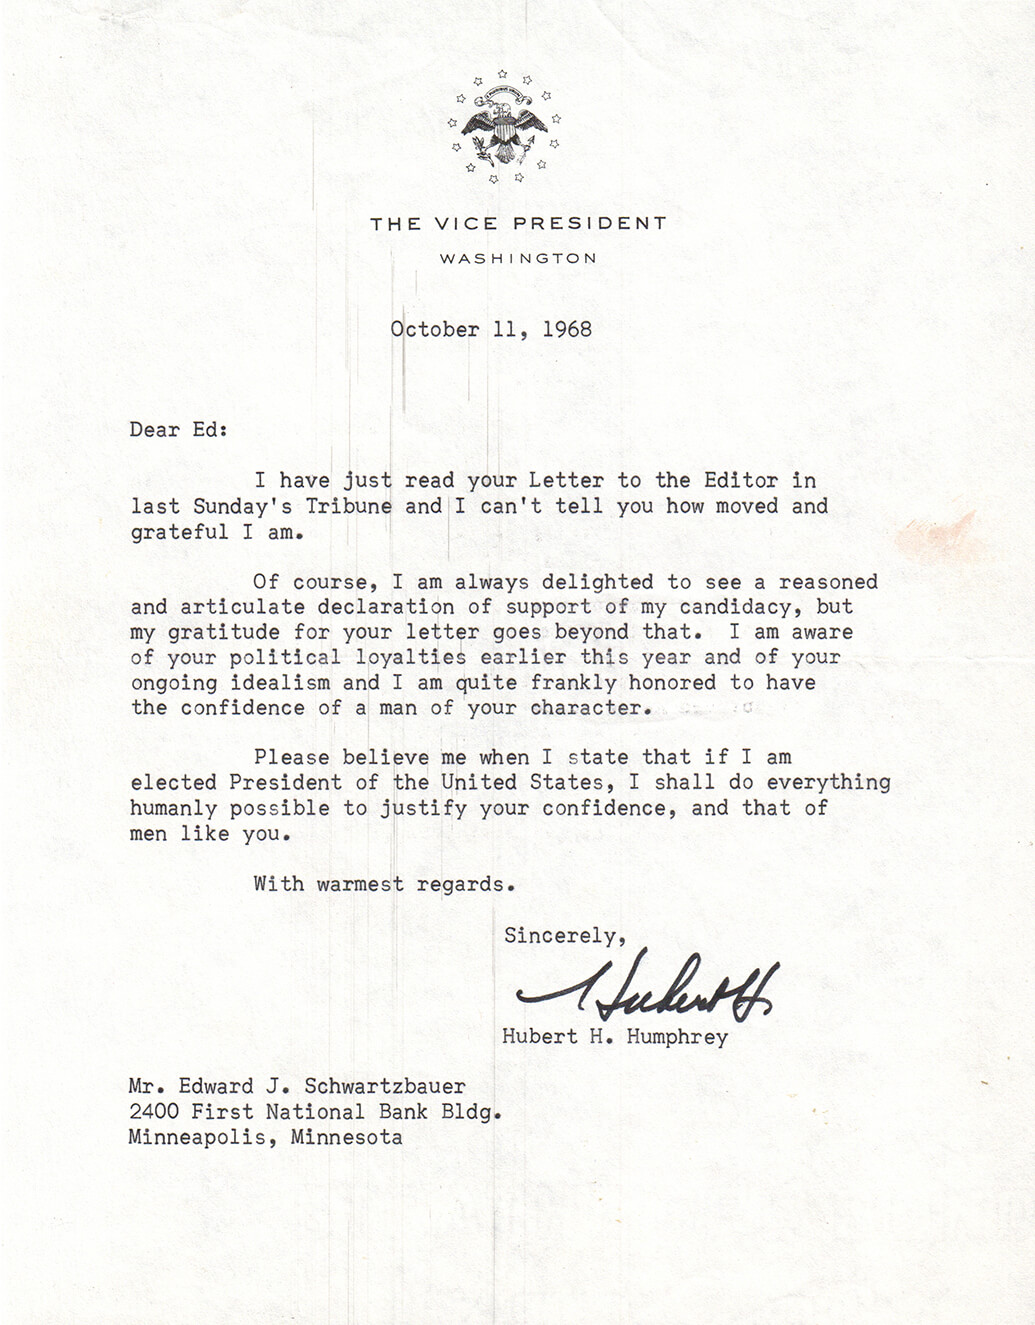 A signed letter from VP Hubert H. Humphrey dated October 11, 1968. Letter starts with: "Dear Ed: I have just read your Letter to the Editor in last Sundays Tribune and I cant tell you how moved and grateful I am."